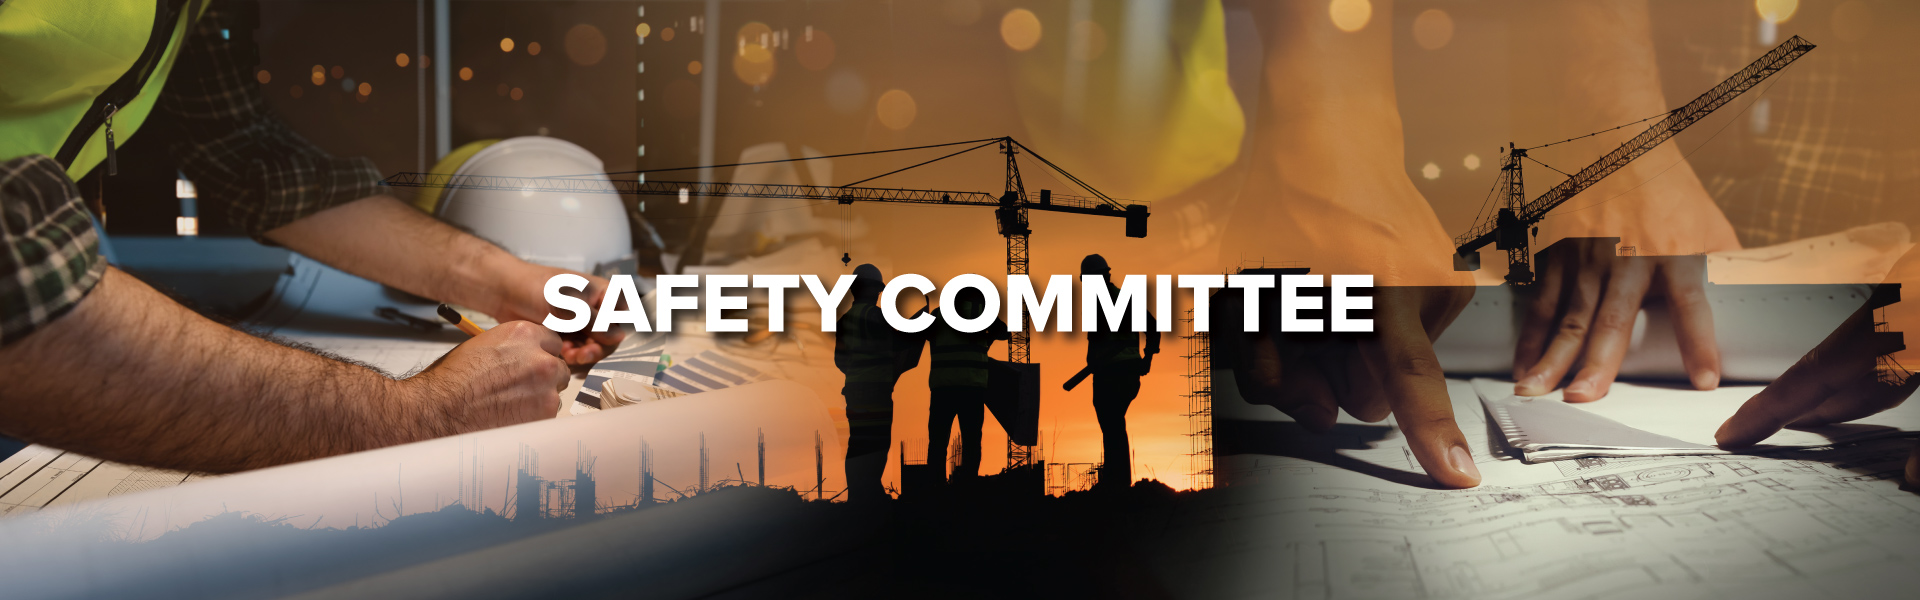 Safety-Committee-Header_1920x600